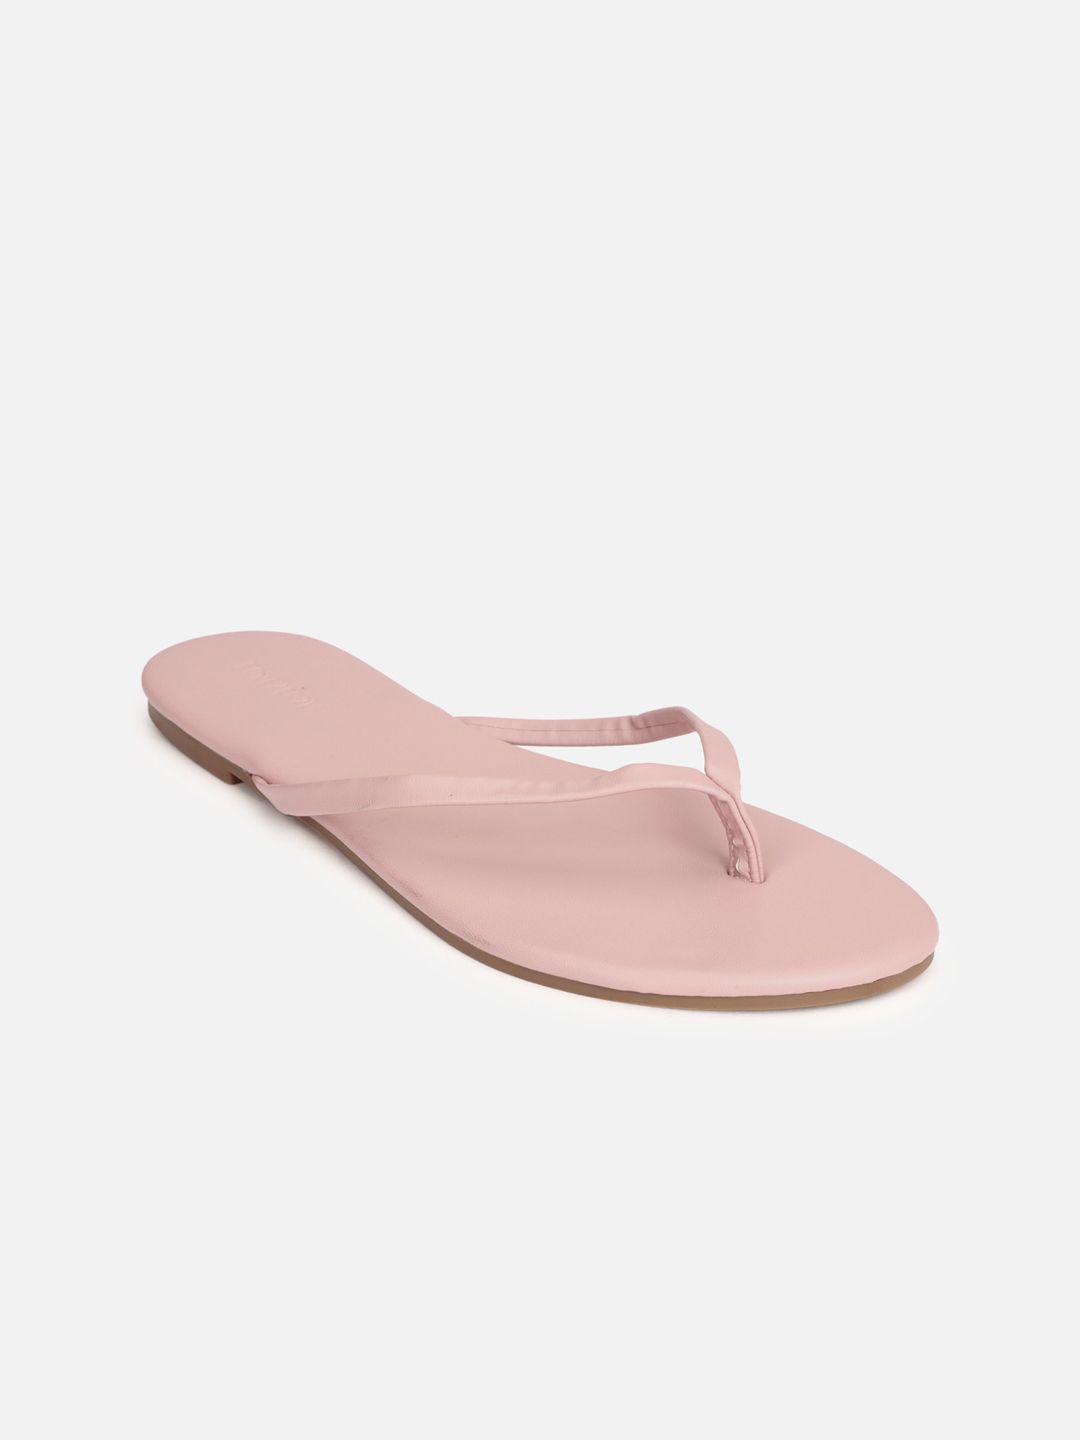 FOREVER 21 Women Pink Open Toe Flats Price in India